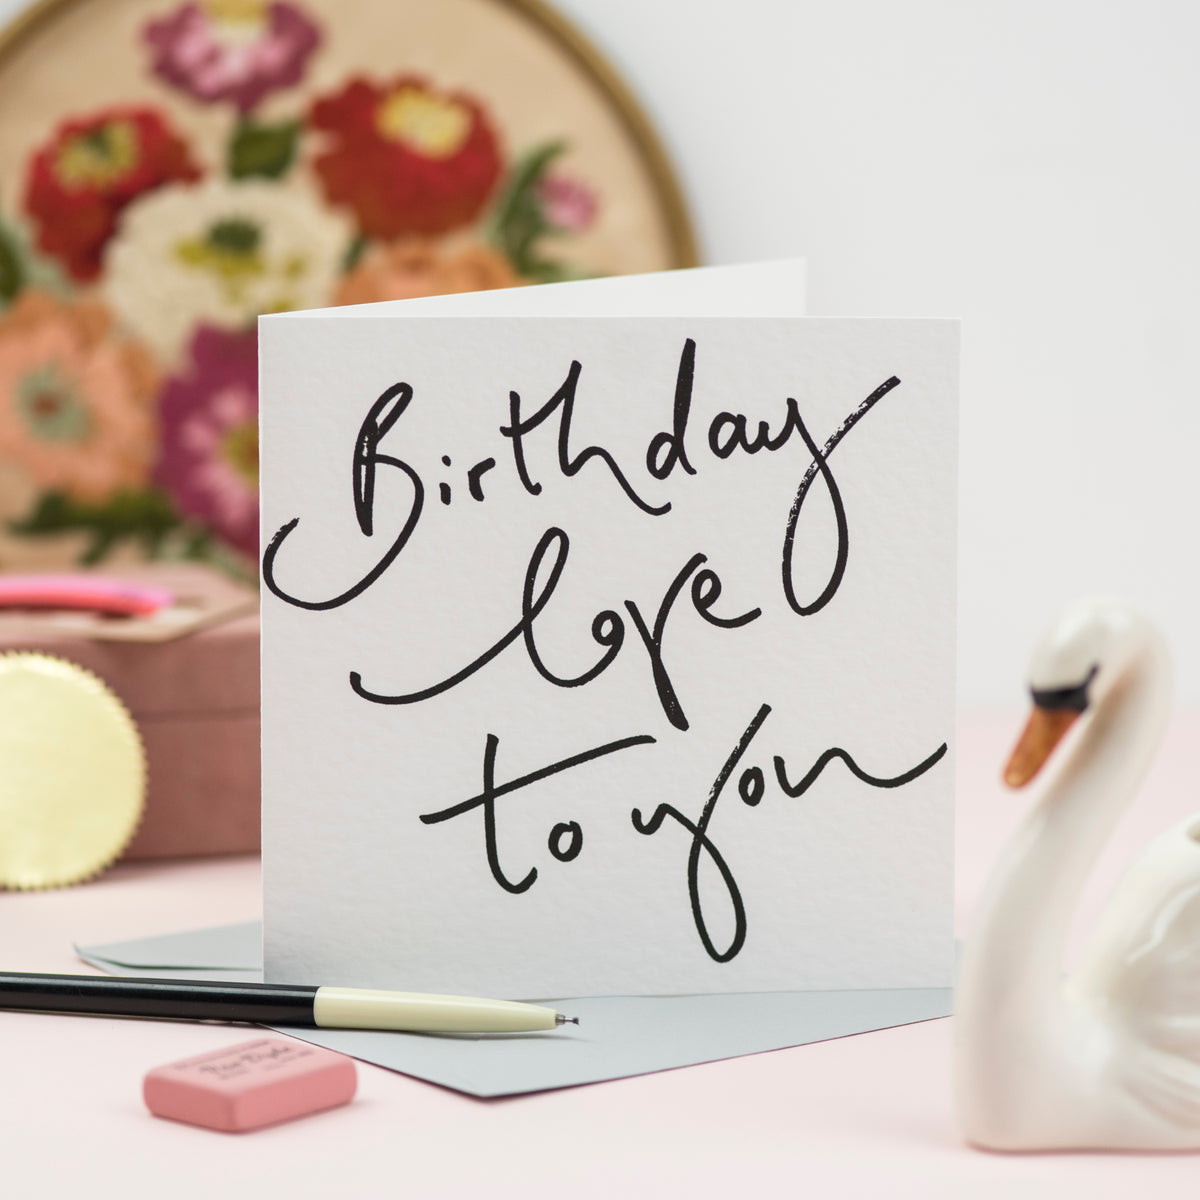 'Birthday Love To You' Hand Lettered Card